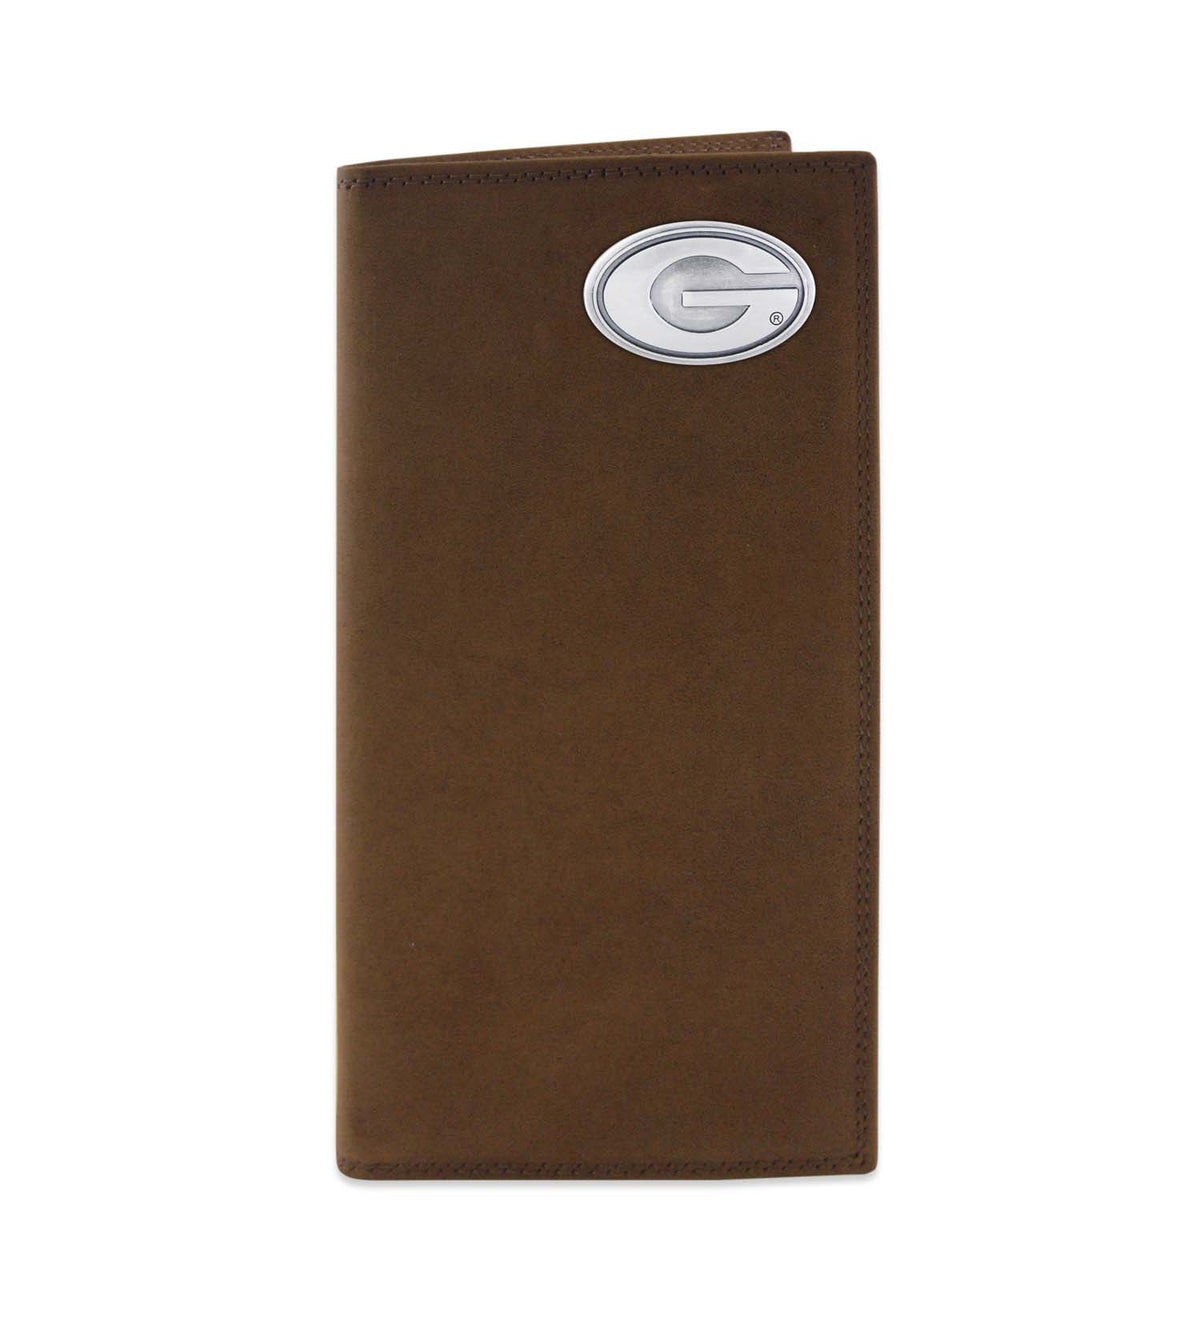 UGA Leather Concho Roper Wallet